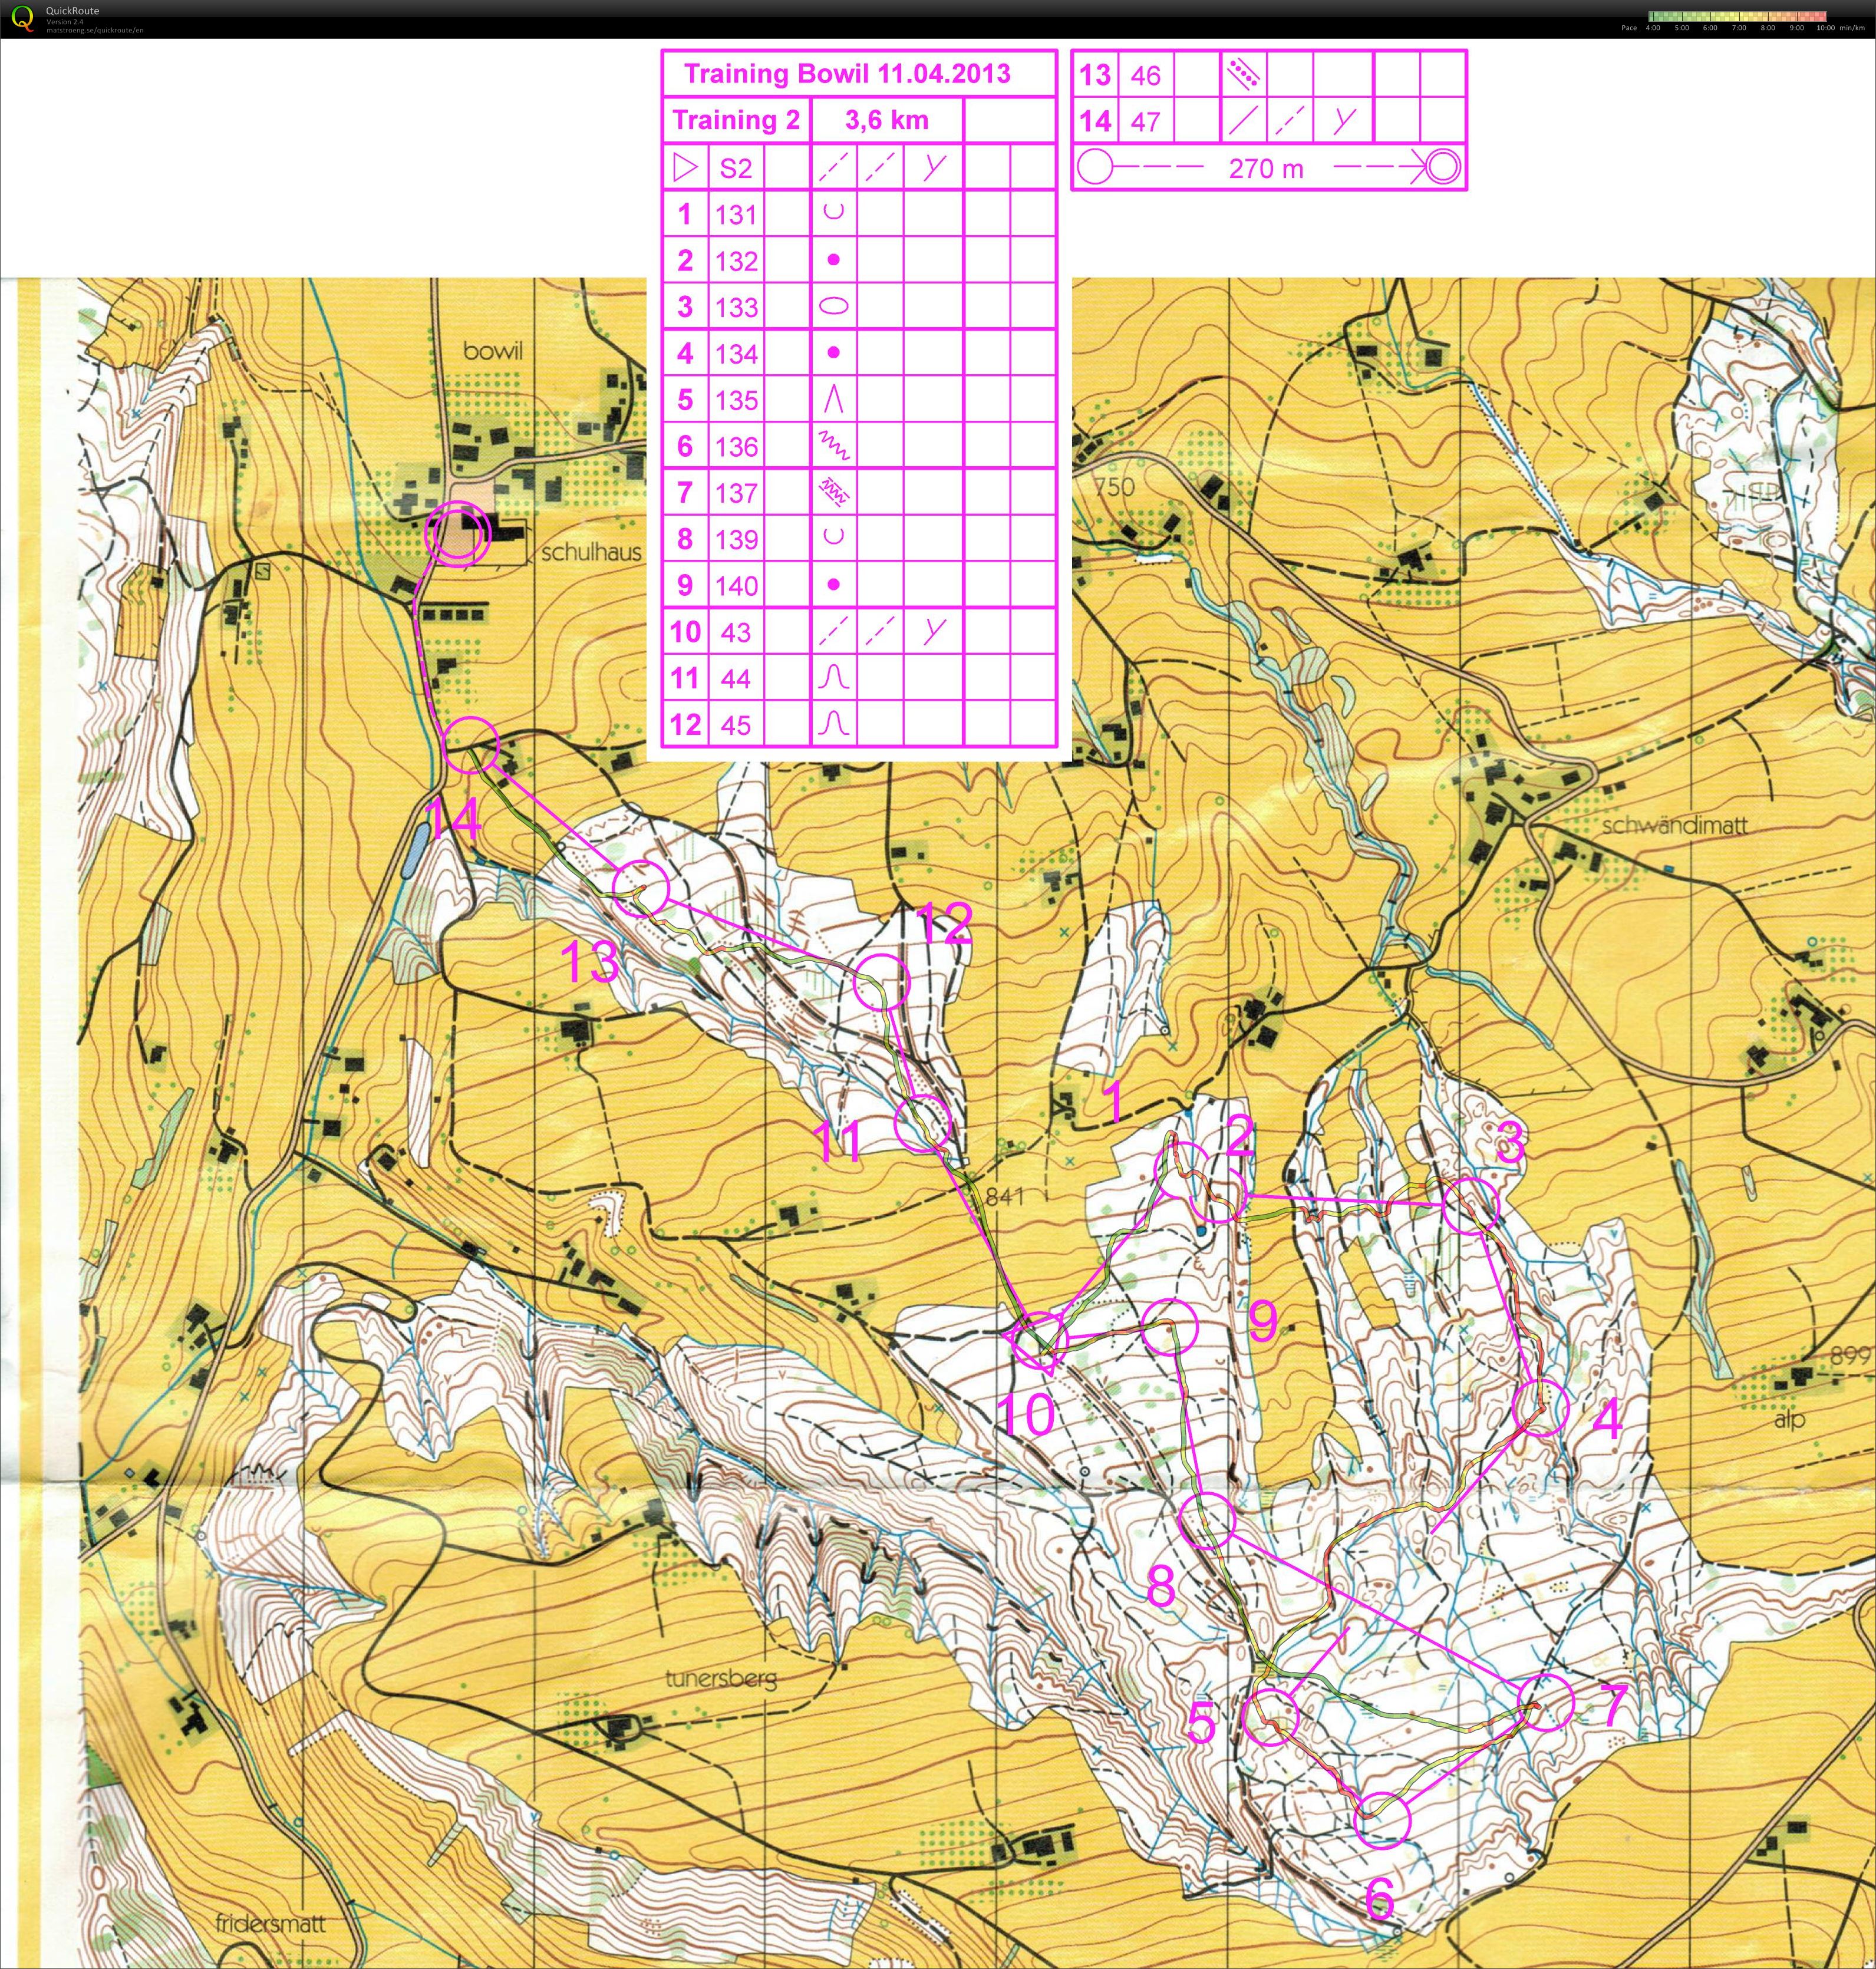 Training Bowil Map 2 (2013-04-11)